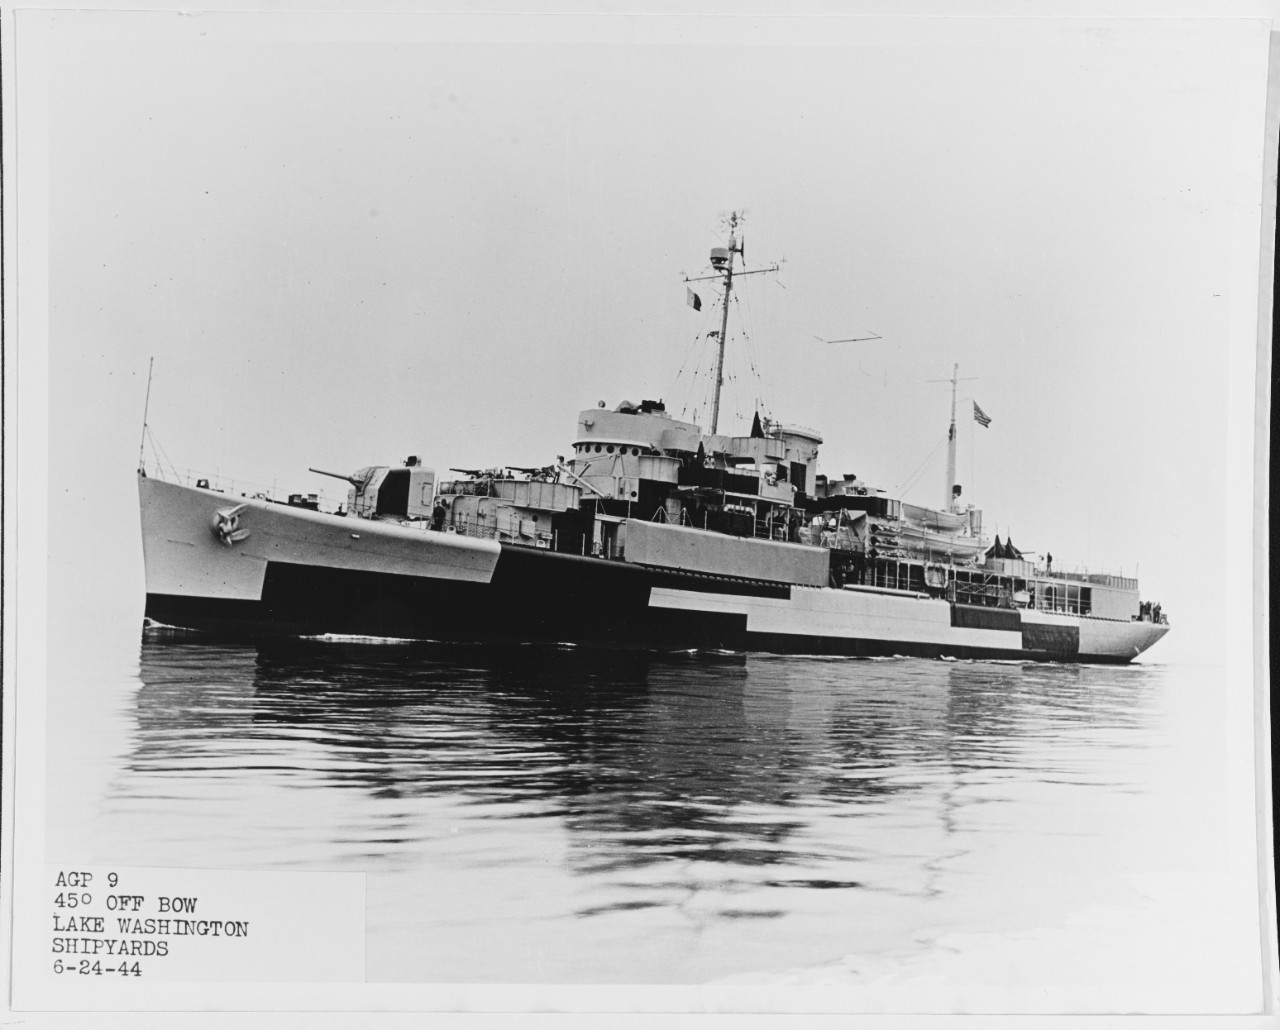 Photo #: 19-N-69688  USS Willoughby (AGP-9)